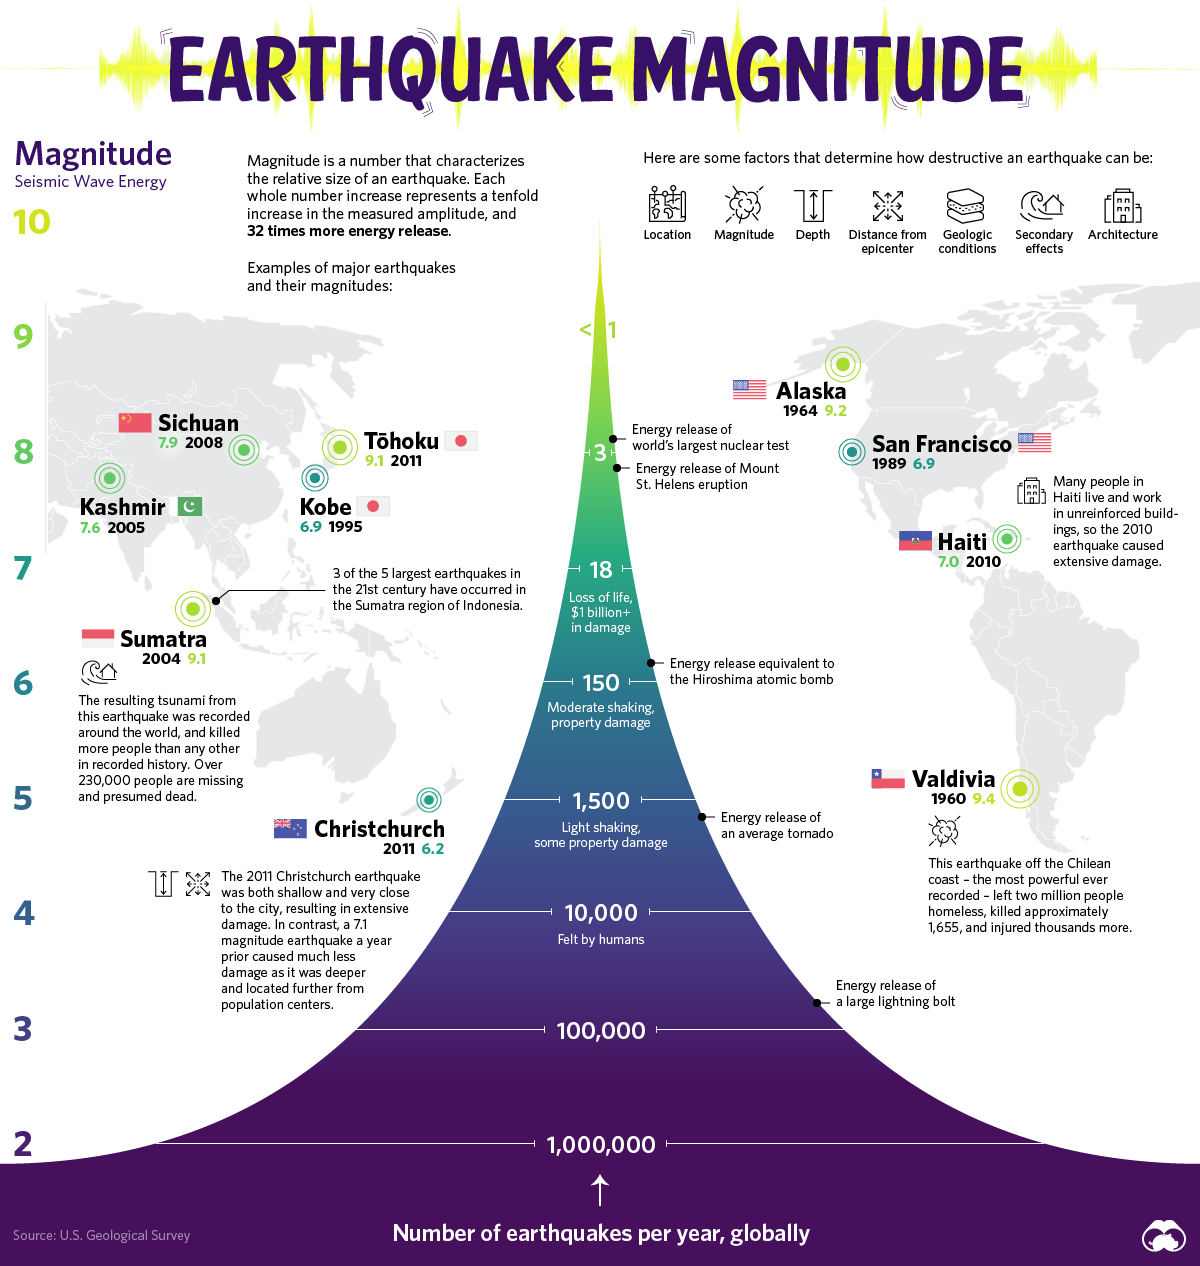 The Richter Scale: How the size of an earthquake is determined